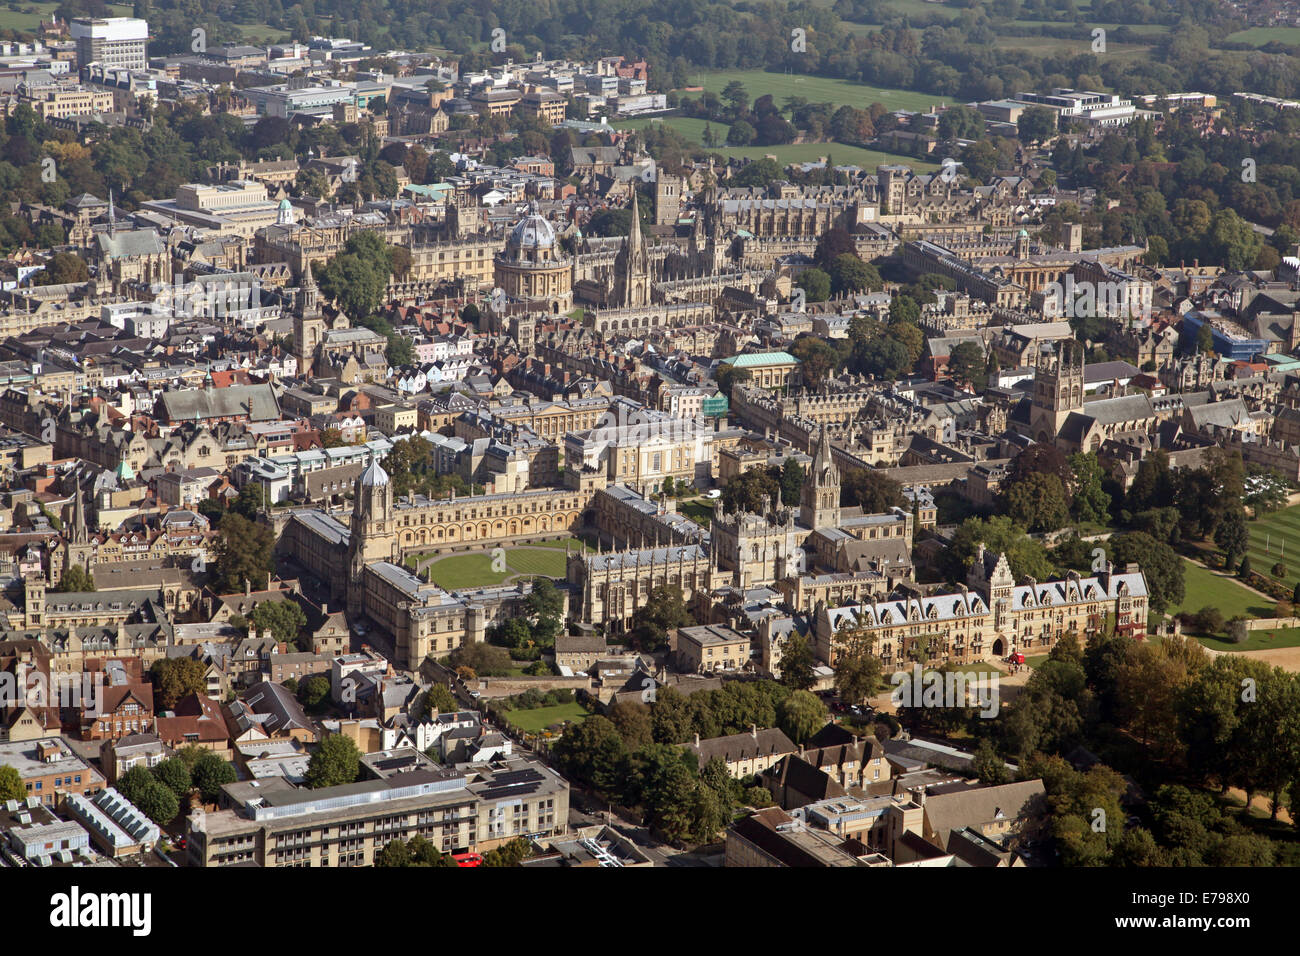 aerial view of Oxford city centre with University Colleges and the Bodleian Library prominent Stock Photo